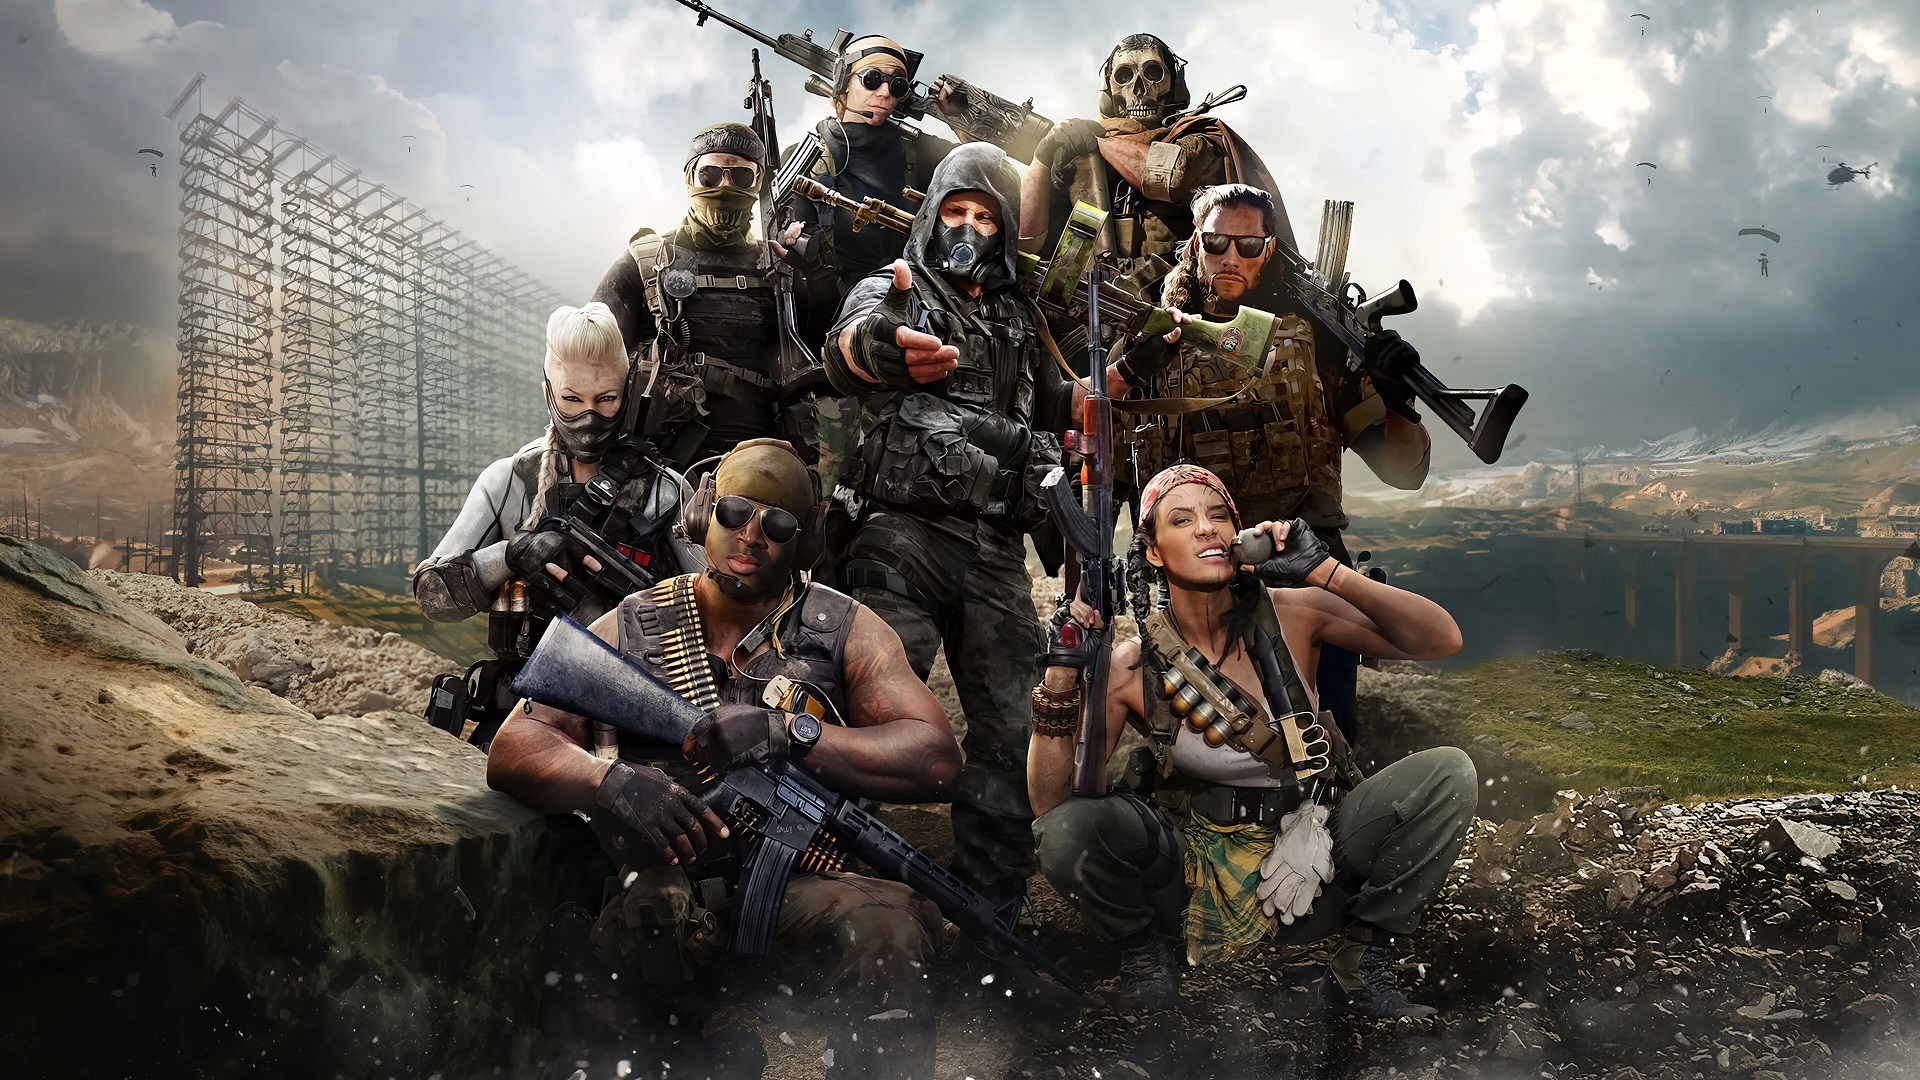 Announcing Call of Duty®: Warzone™ Mobile, redefining Battle Royale for  gamers on the go